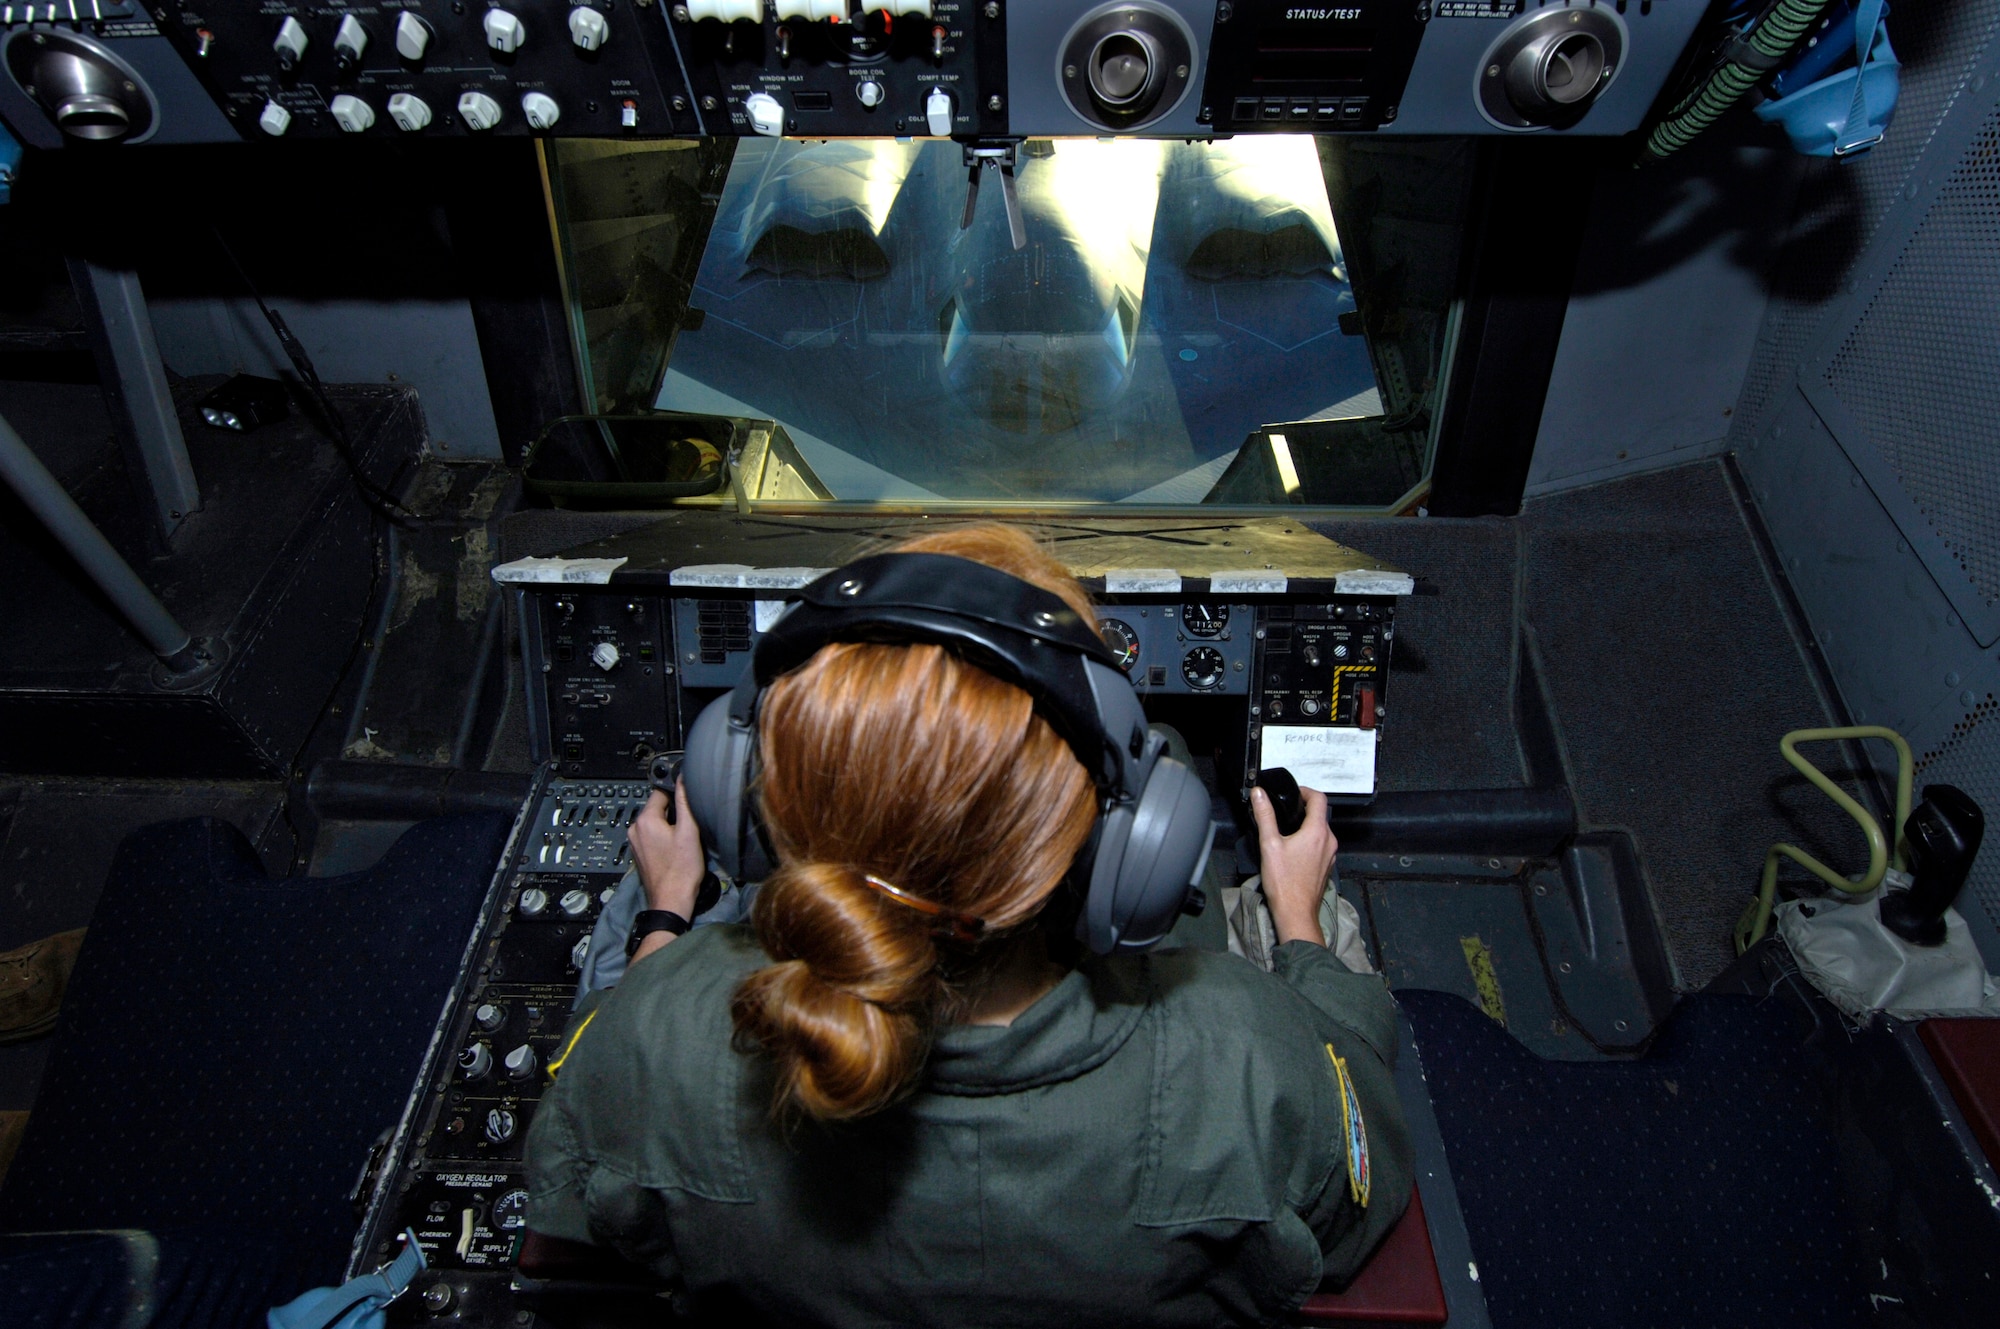 Senior Airman Alicia Trudeau refuels a B-2 Spirit from a KC-10 Extender over Australia during exercise Green Lightning on Tuesday, July 25. The KC-10 and B-2 are from the 36th Expeditionary Wing at Guam. The exercise will test U.S. capabilities and provide operational familiarity in the region for the Pacific bomber presence as well as serve to enhance relations with the Australians. Airman Trudeau is deployed from the 78th Air Refueling Squadron at McGuire Air Force Base, N.J. (U.S. Air Force photo/ Tech. Sgt. Shane A. Cuomo)